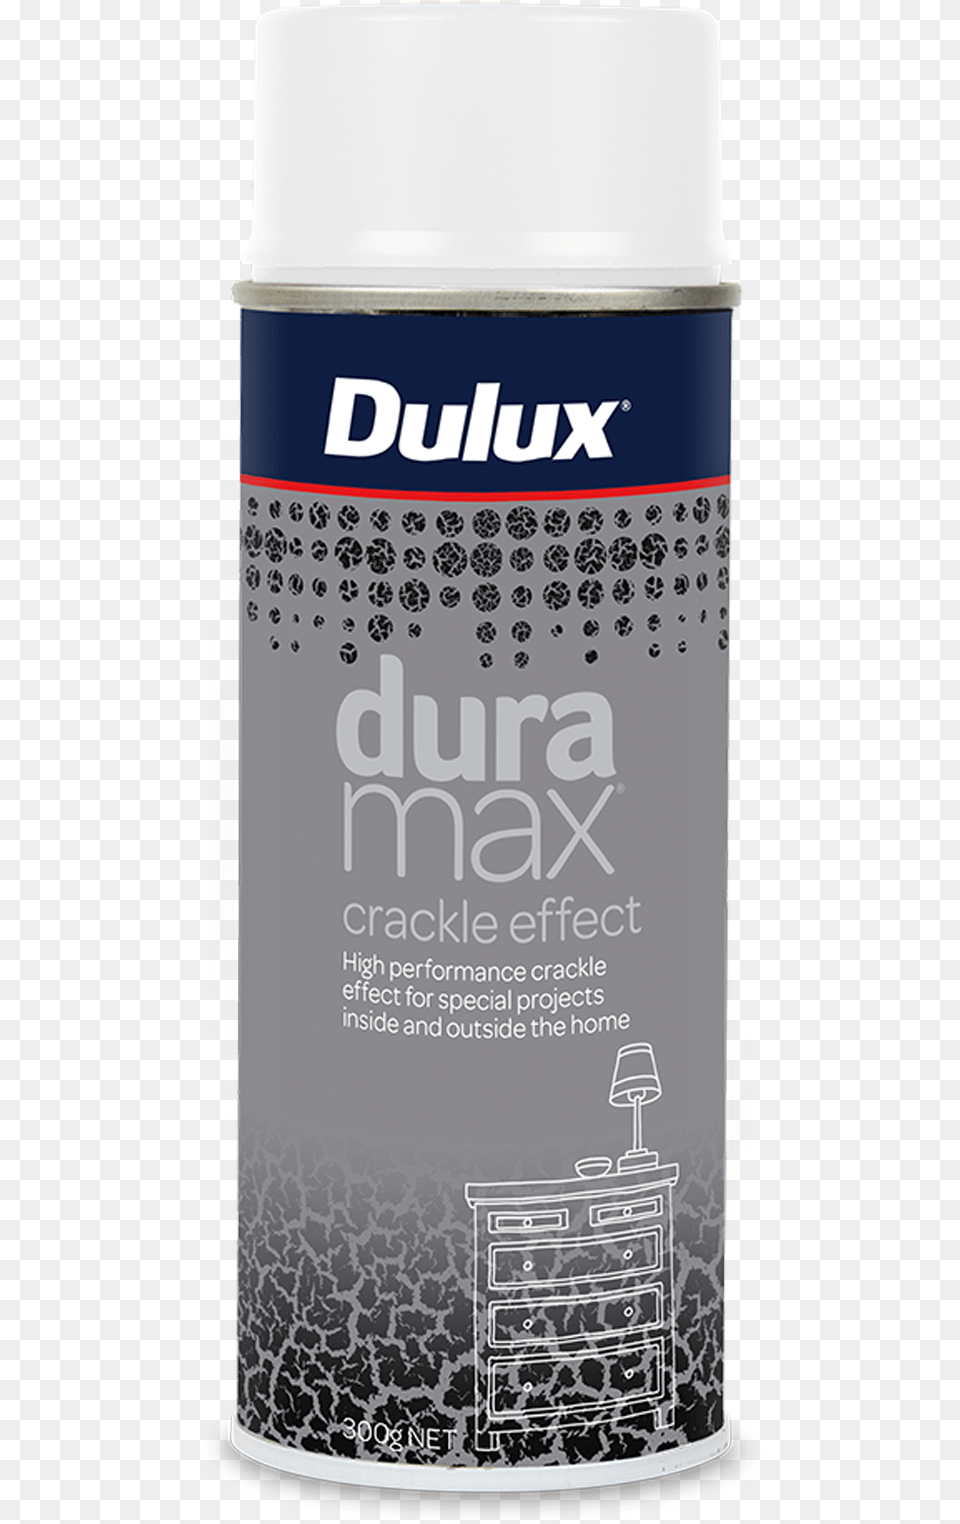 Dulux Duramax 300g Crackle Effect Spray Paint Dulux, Can, Spray Can, Tin, Bottle Png Image